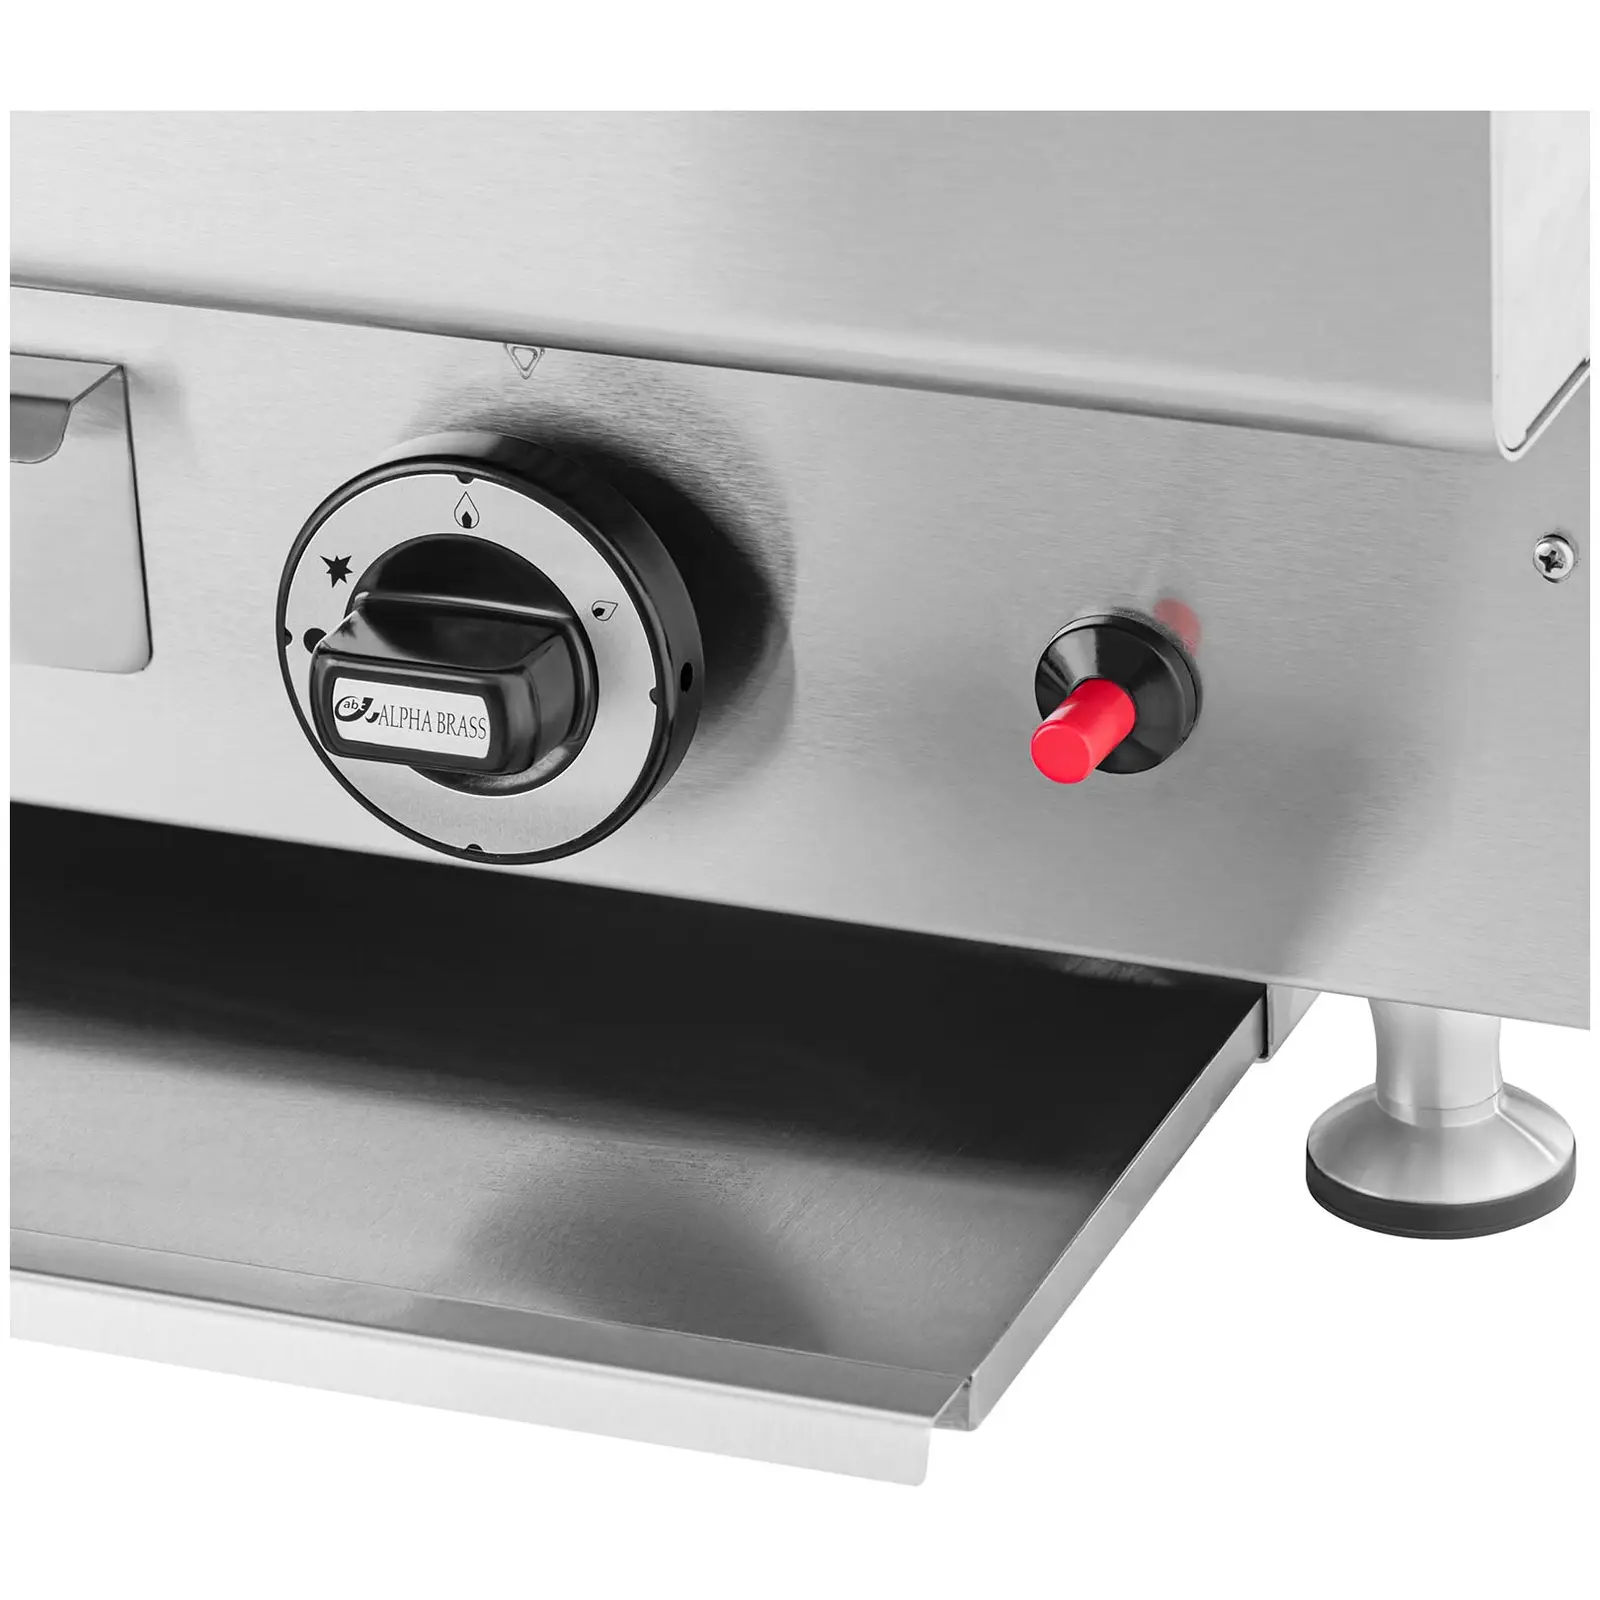 Lavastensgrill - 2 x 7200 W - 50 x 47 cm - 0 - 460 °C - Royal Catering 